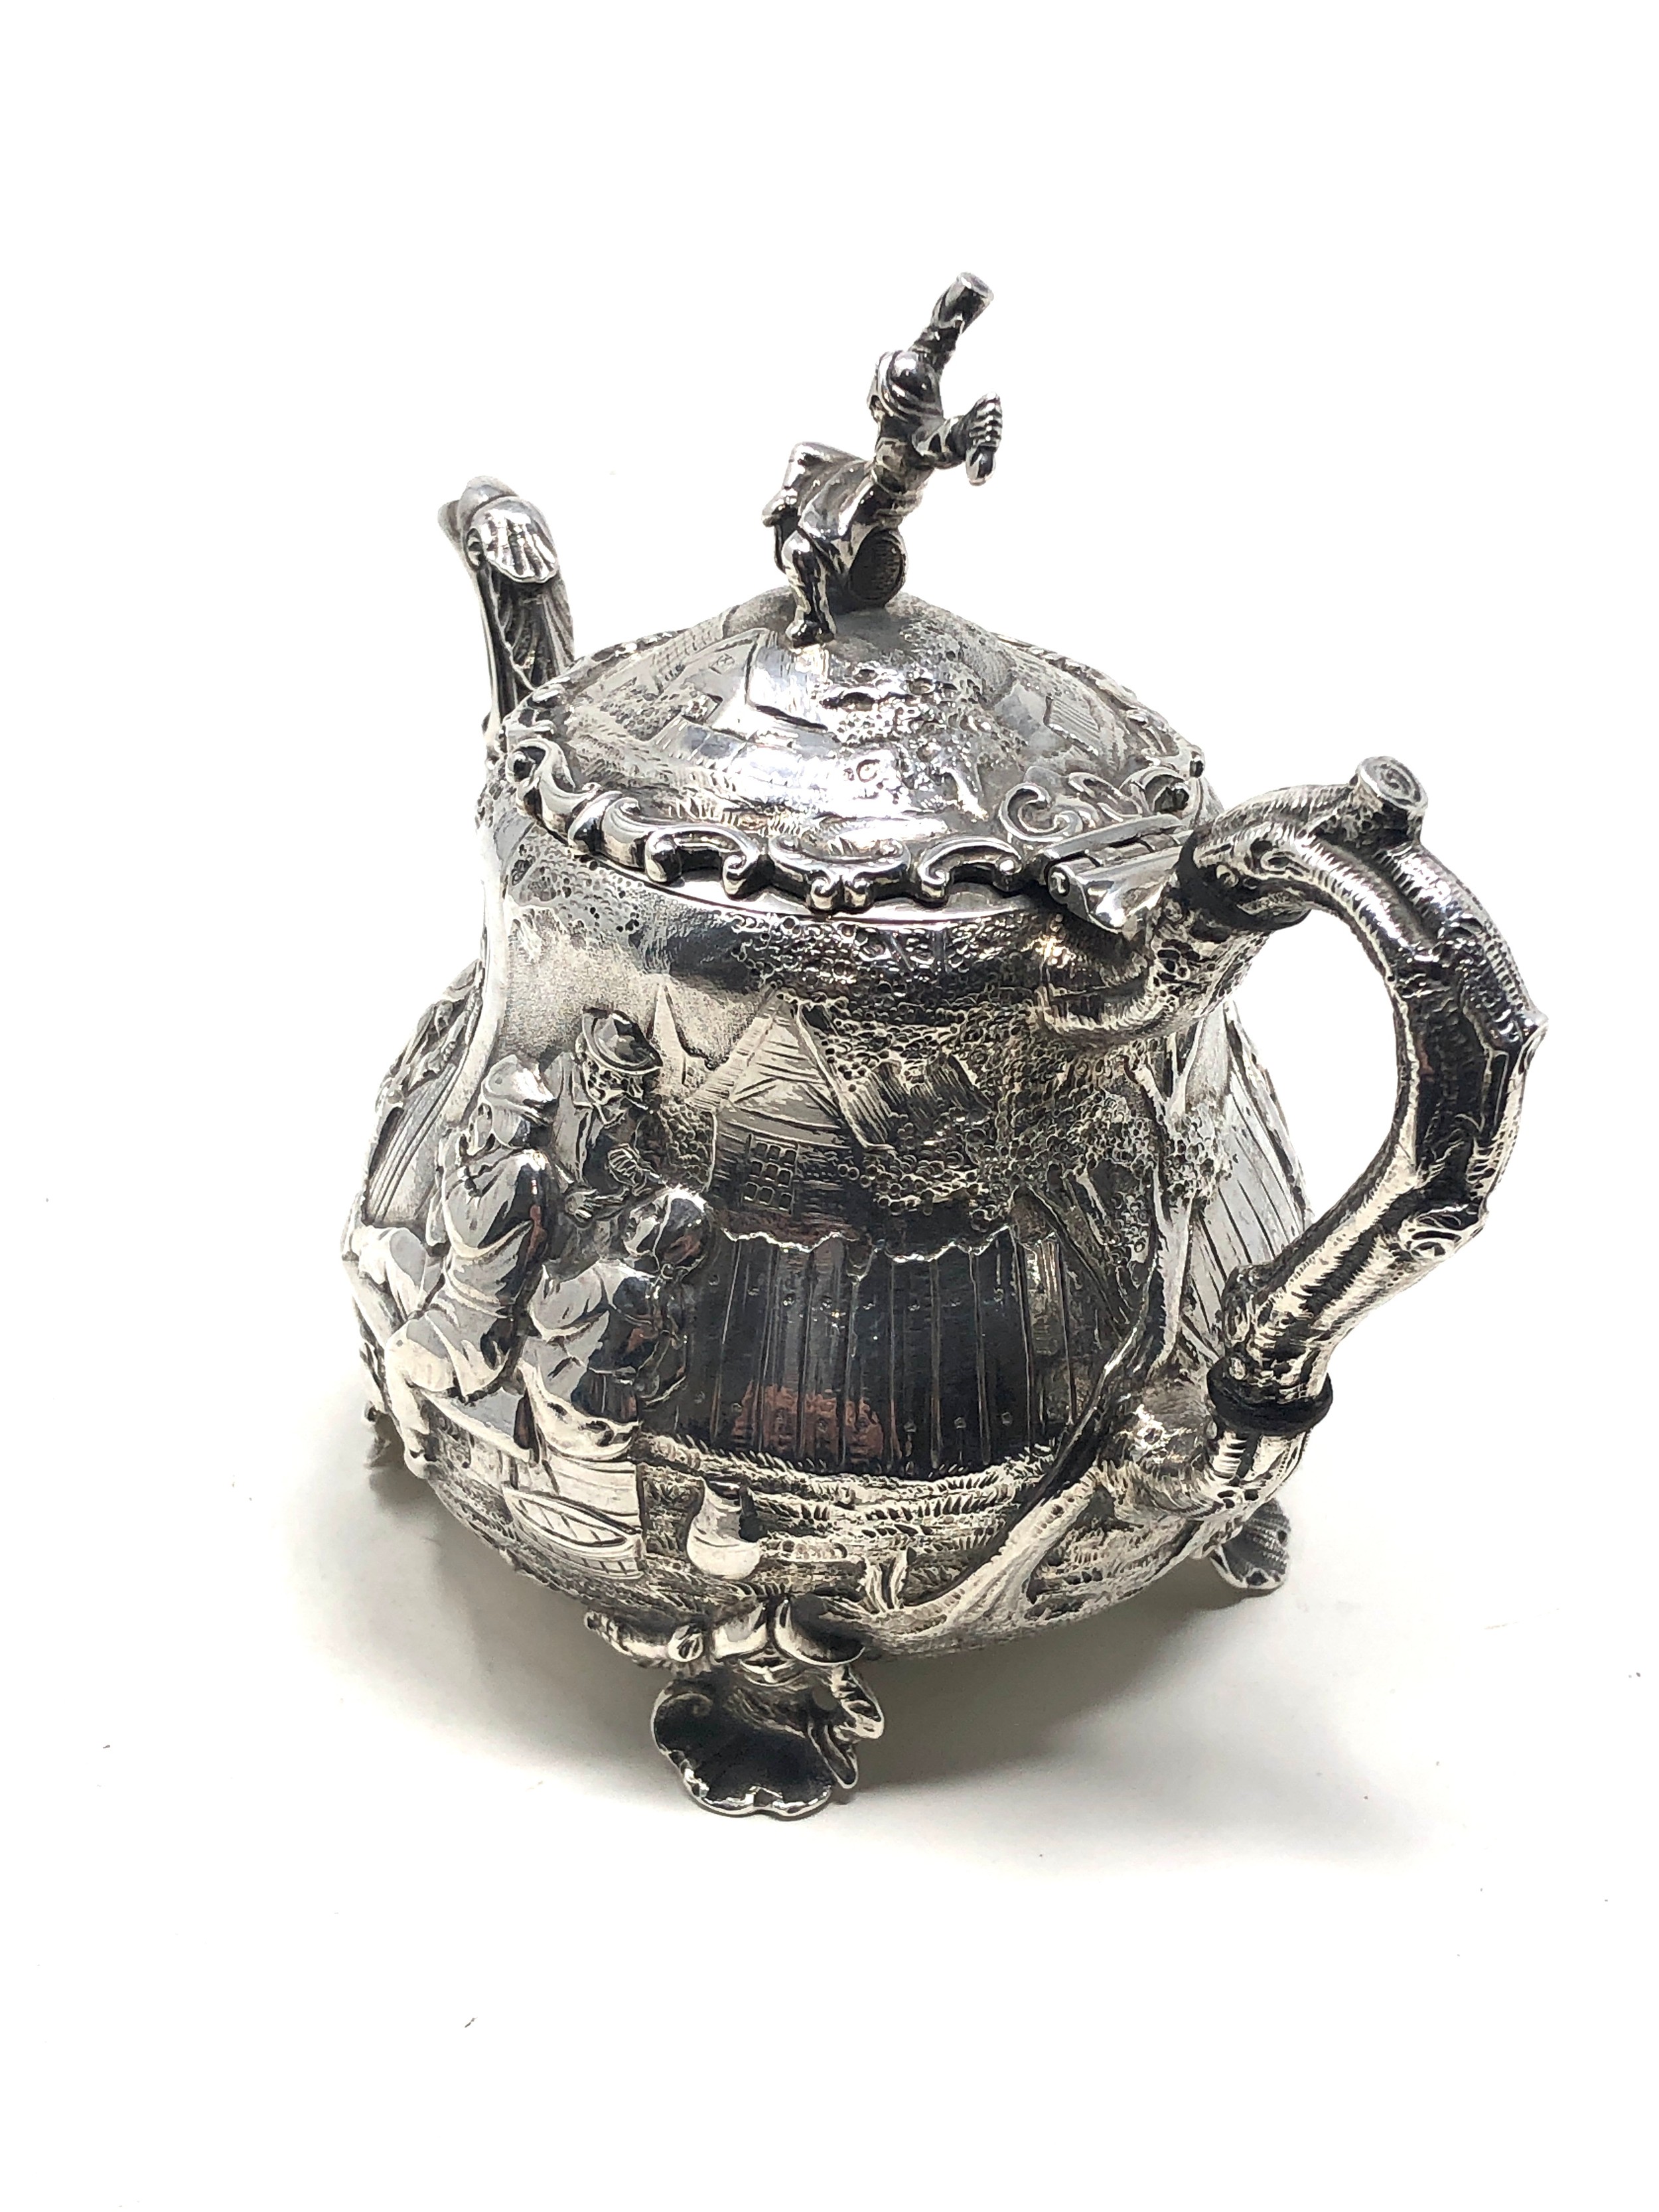 Fine Antique Victorian silver bachelor teapot either side with scenes after "Tennier" London - Image 3 of 8